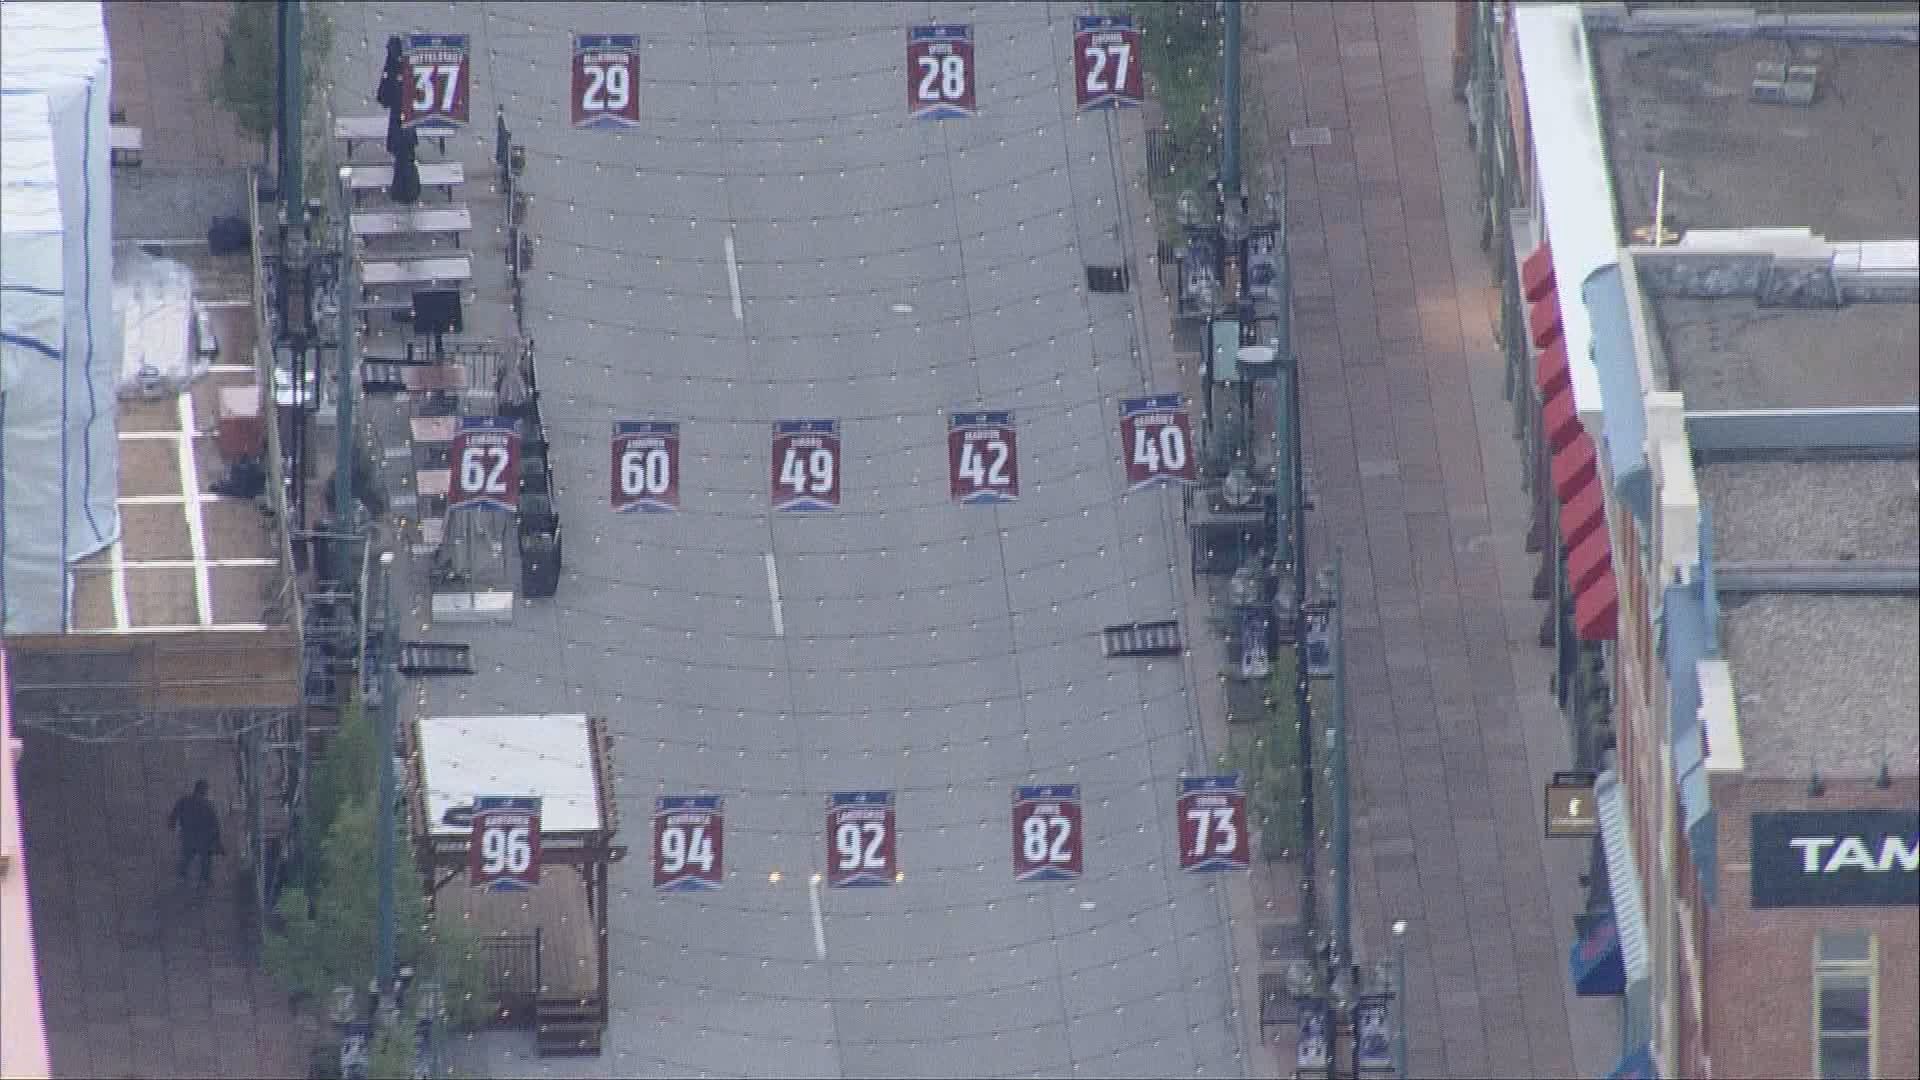 The Colorado Avalanche are back in the NHL playoffs and Denver's Larimer Square is ready and decorated.